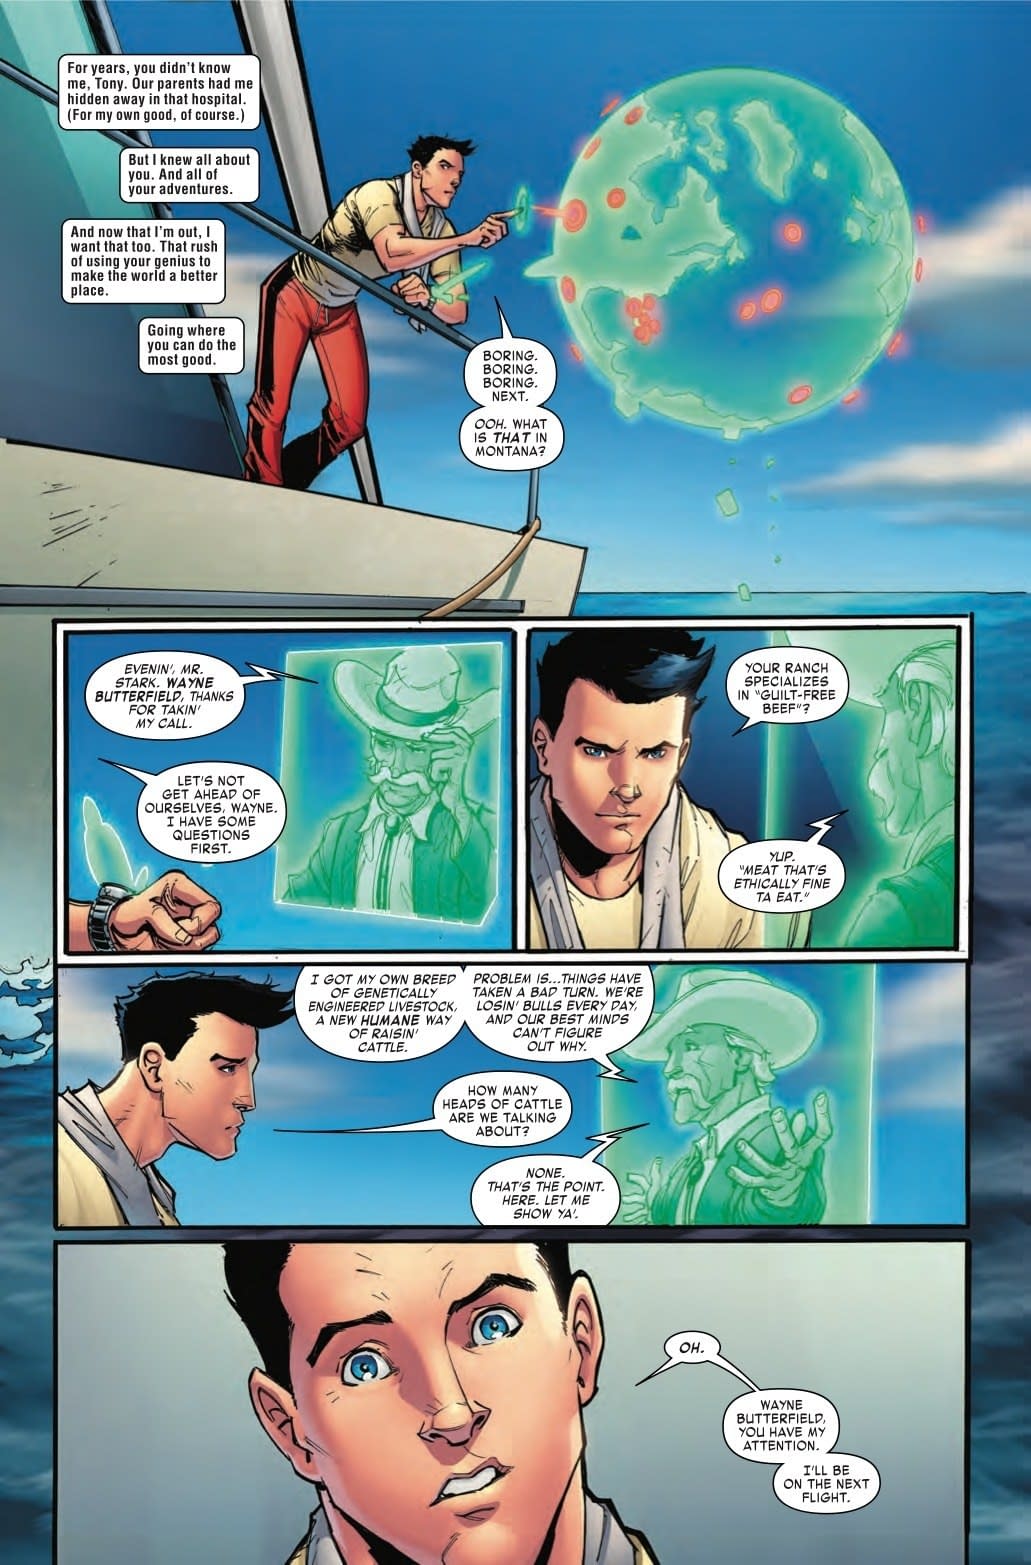 Arno Stark with a Cure for Loneliness? A Tony Stark Iron Man #5 Preview